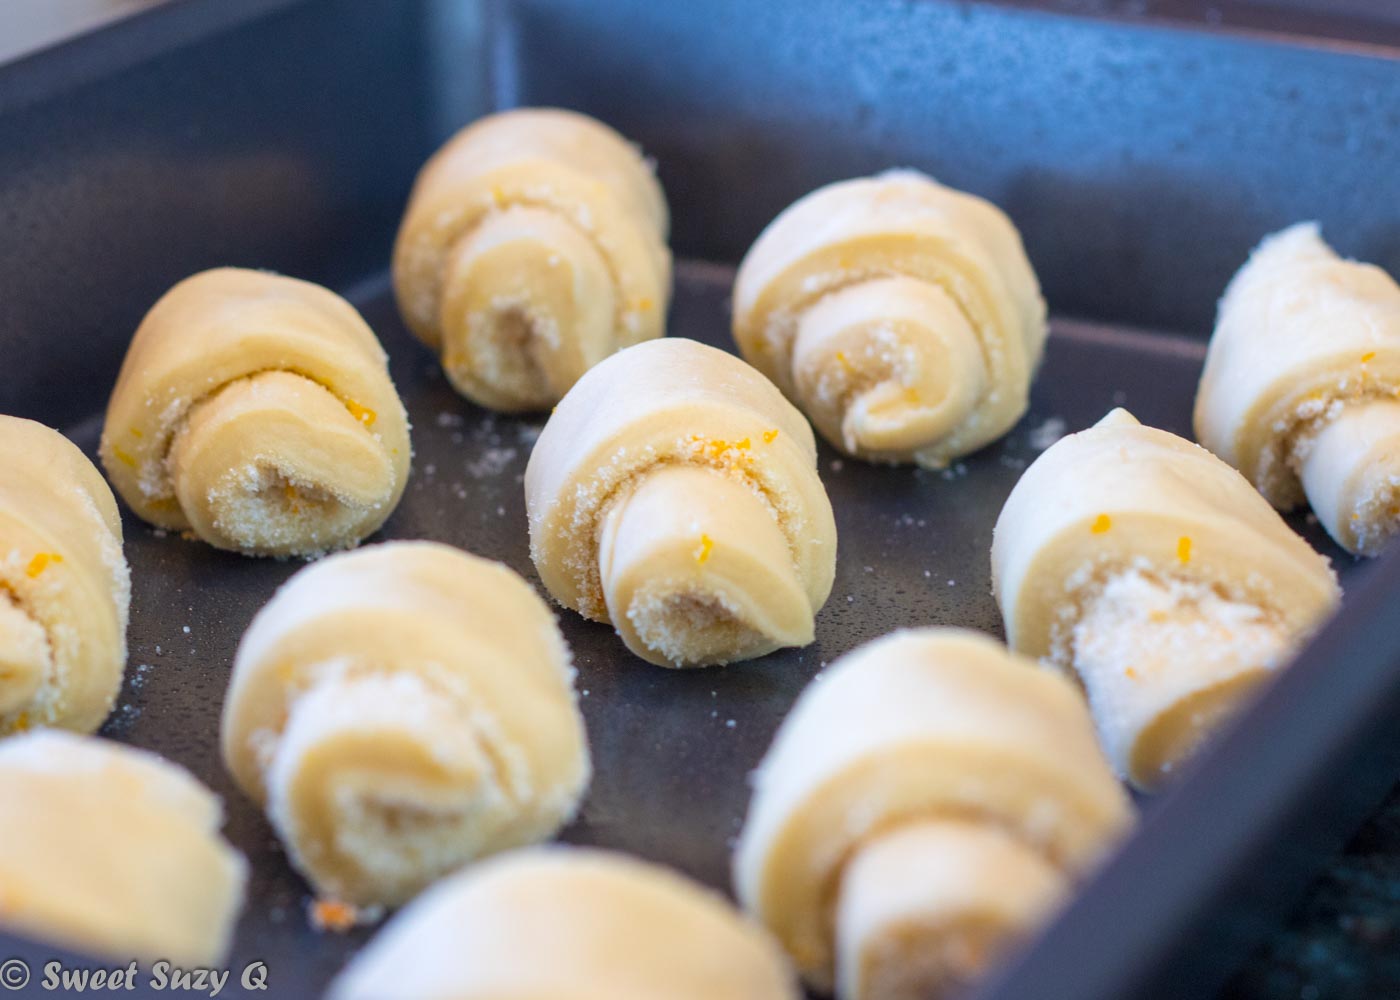 Rolled dough in the pan